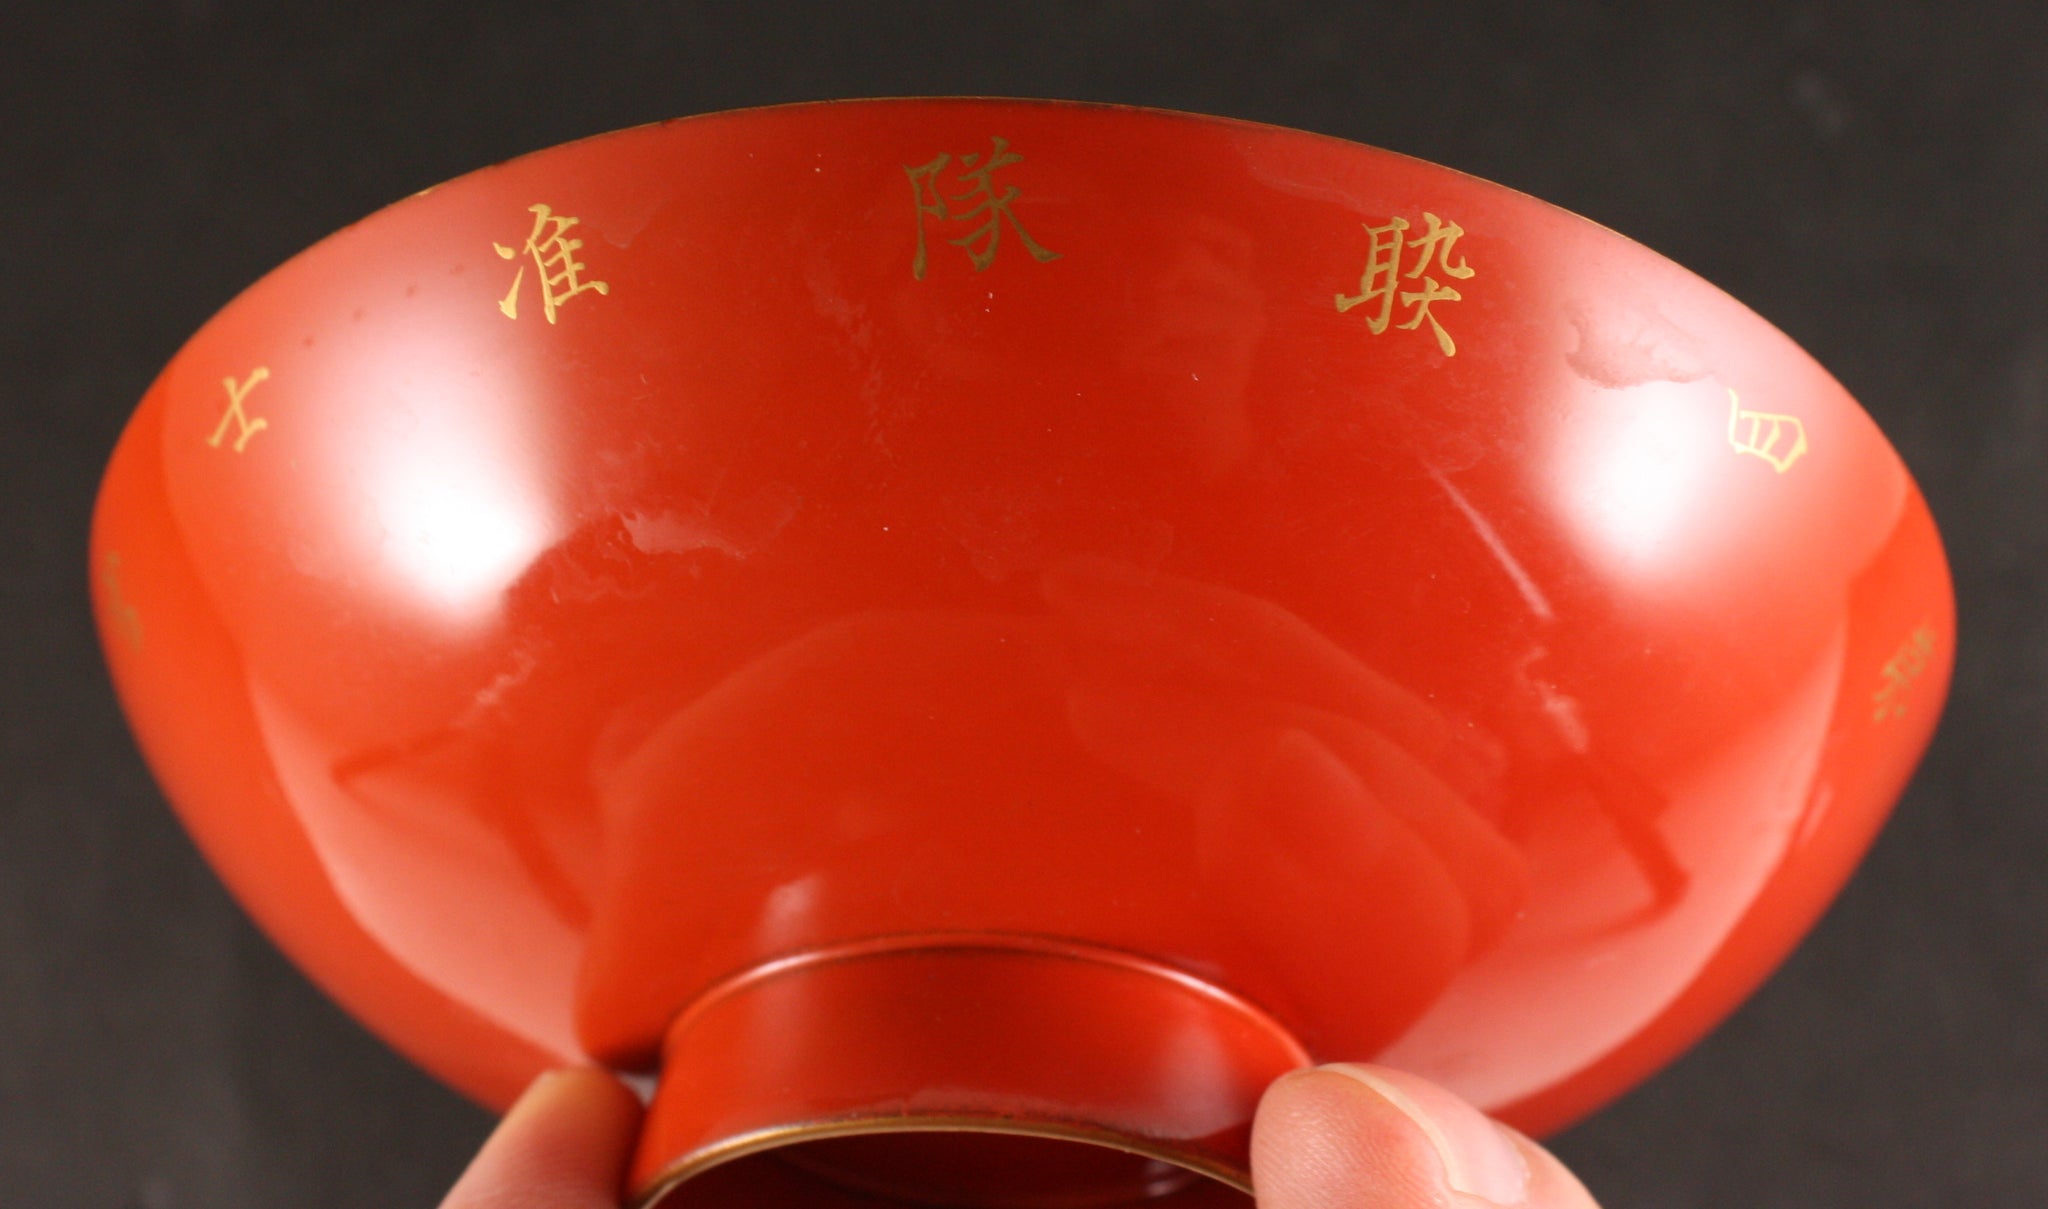 Very Rare Antique Japanese Military Imperial Guards Named NCOs Lacquer Sake Cup Set with Original Box